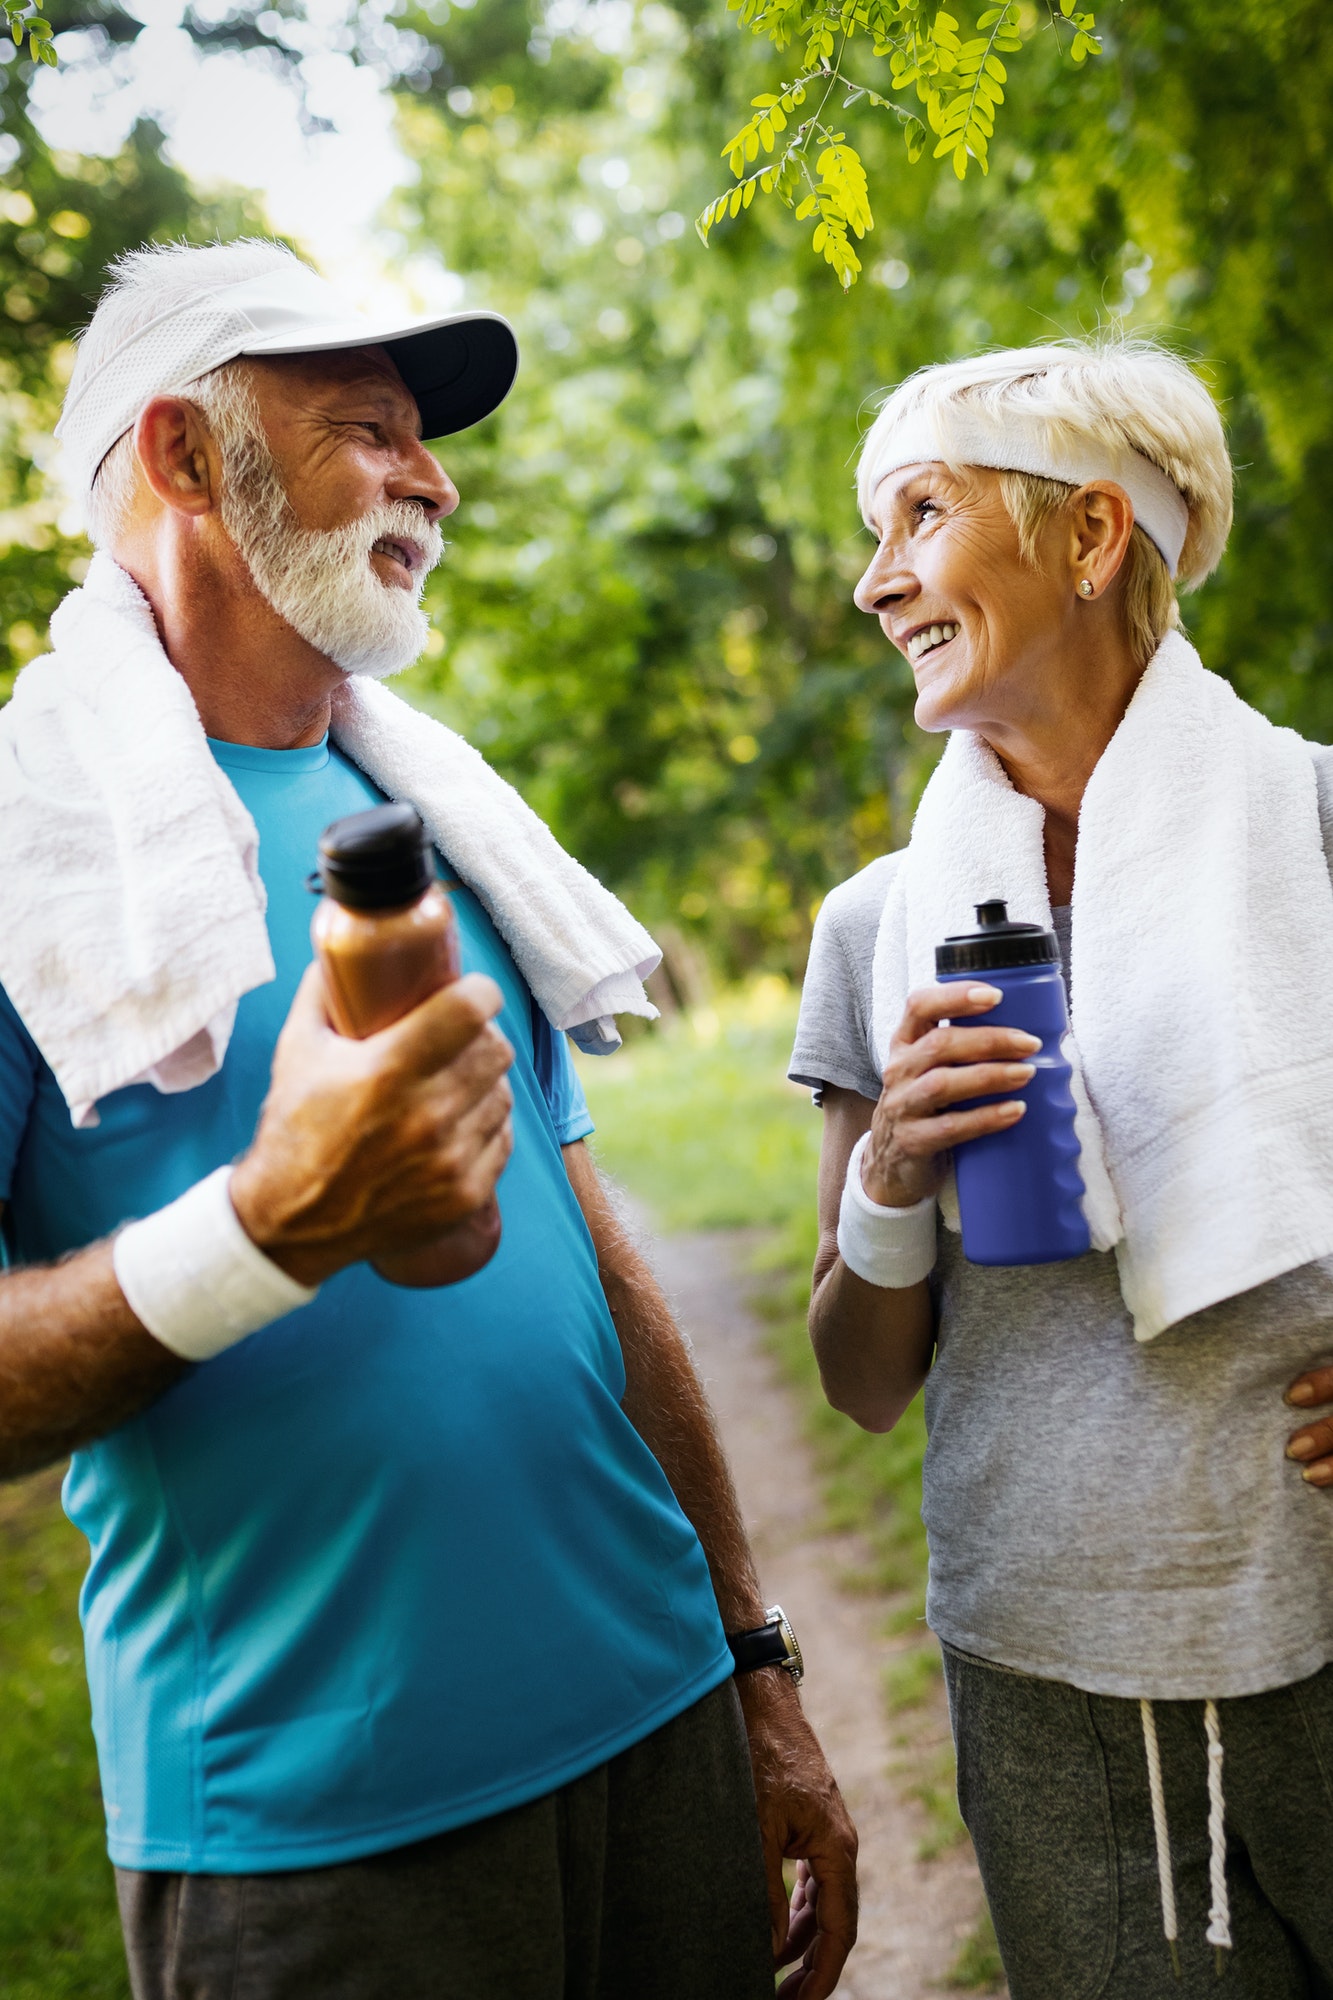 Happy senior couple staying fit by sport running